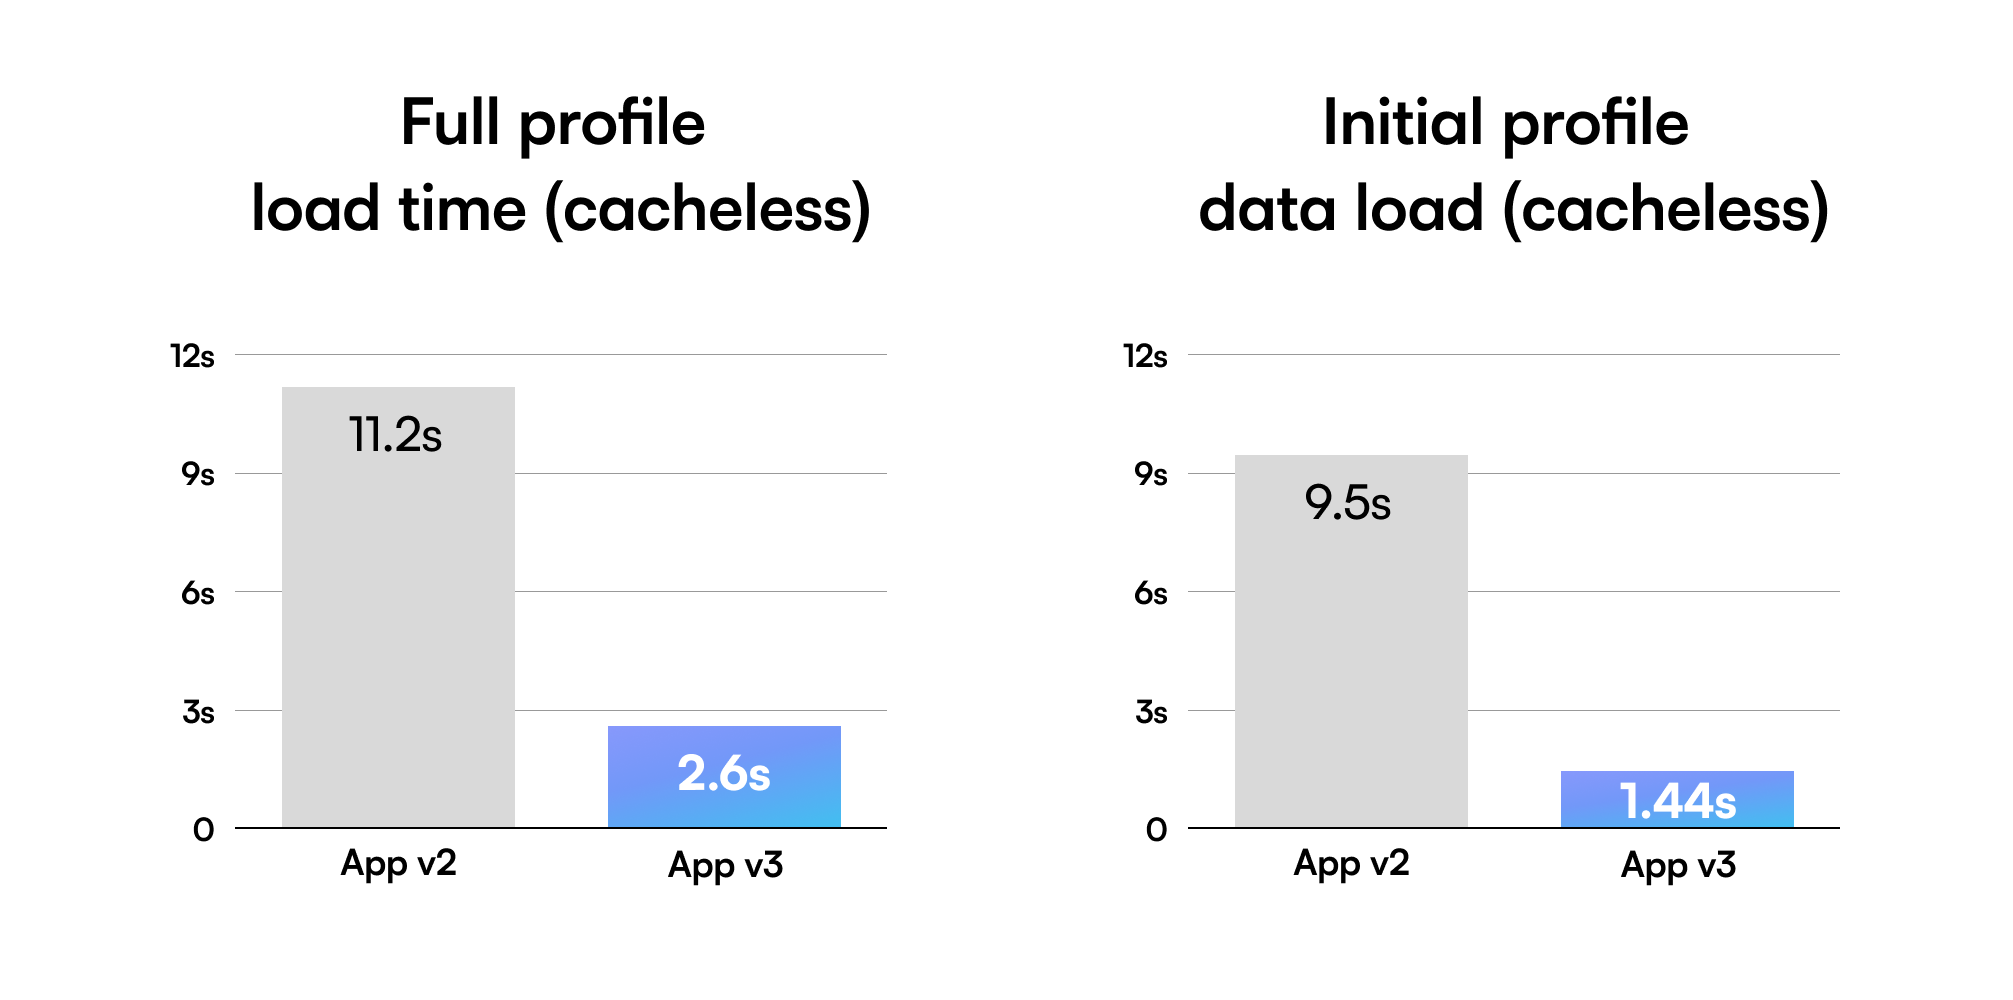 App v3 is a whole lot faster than app v2